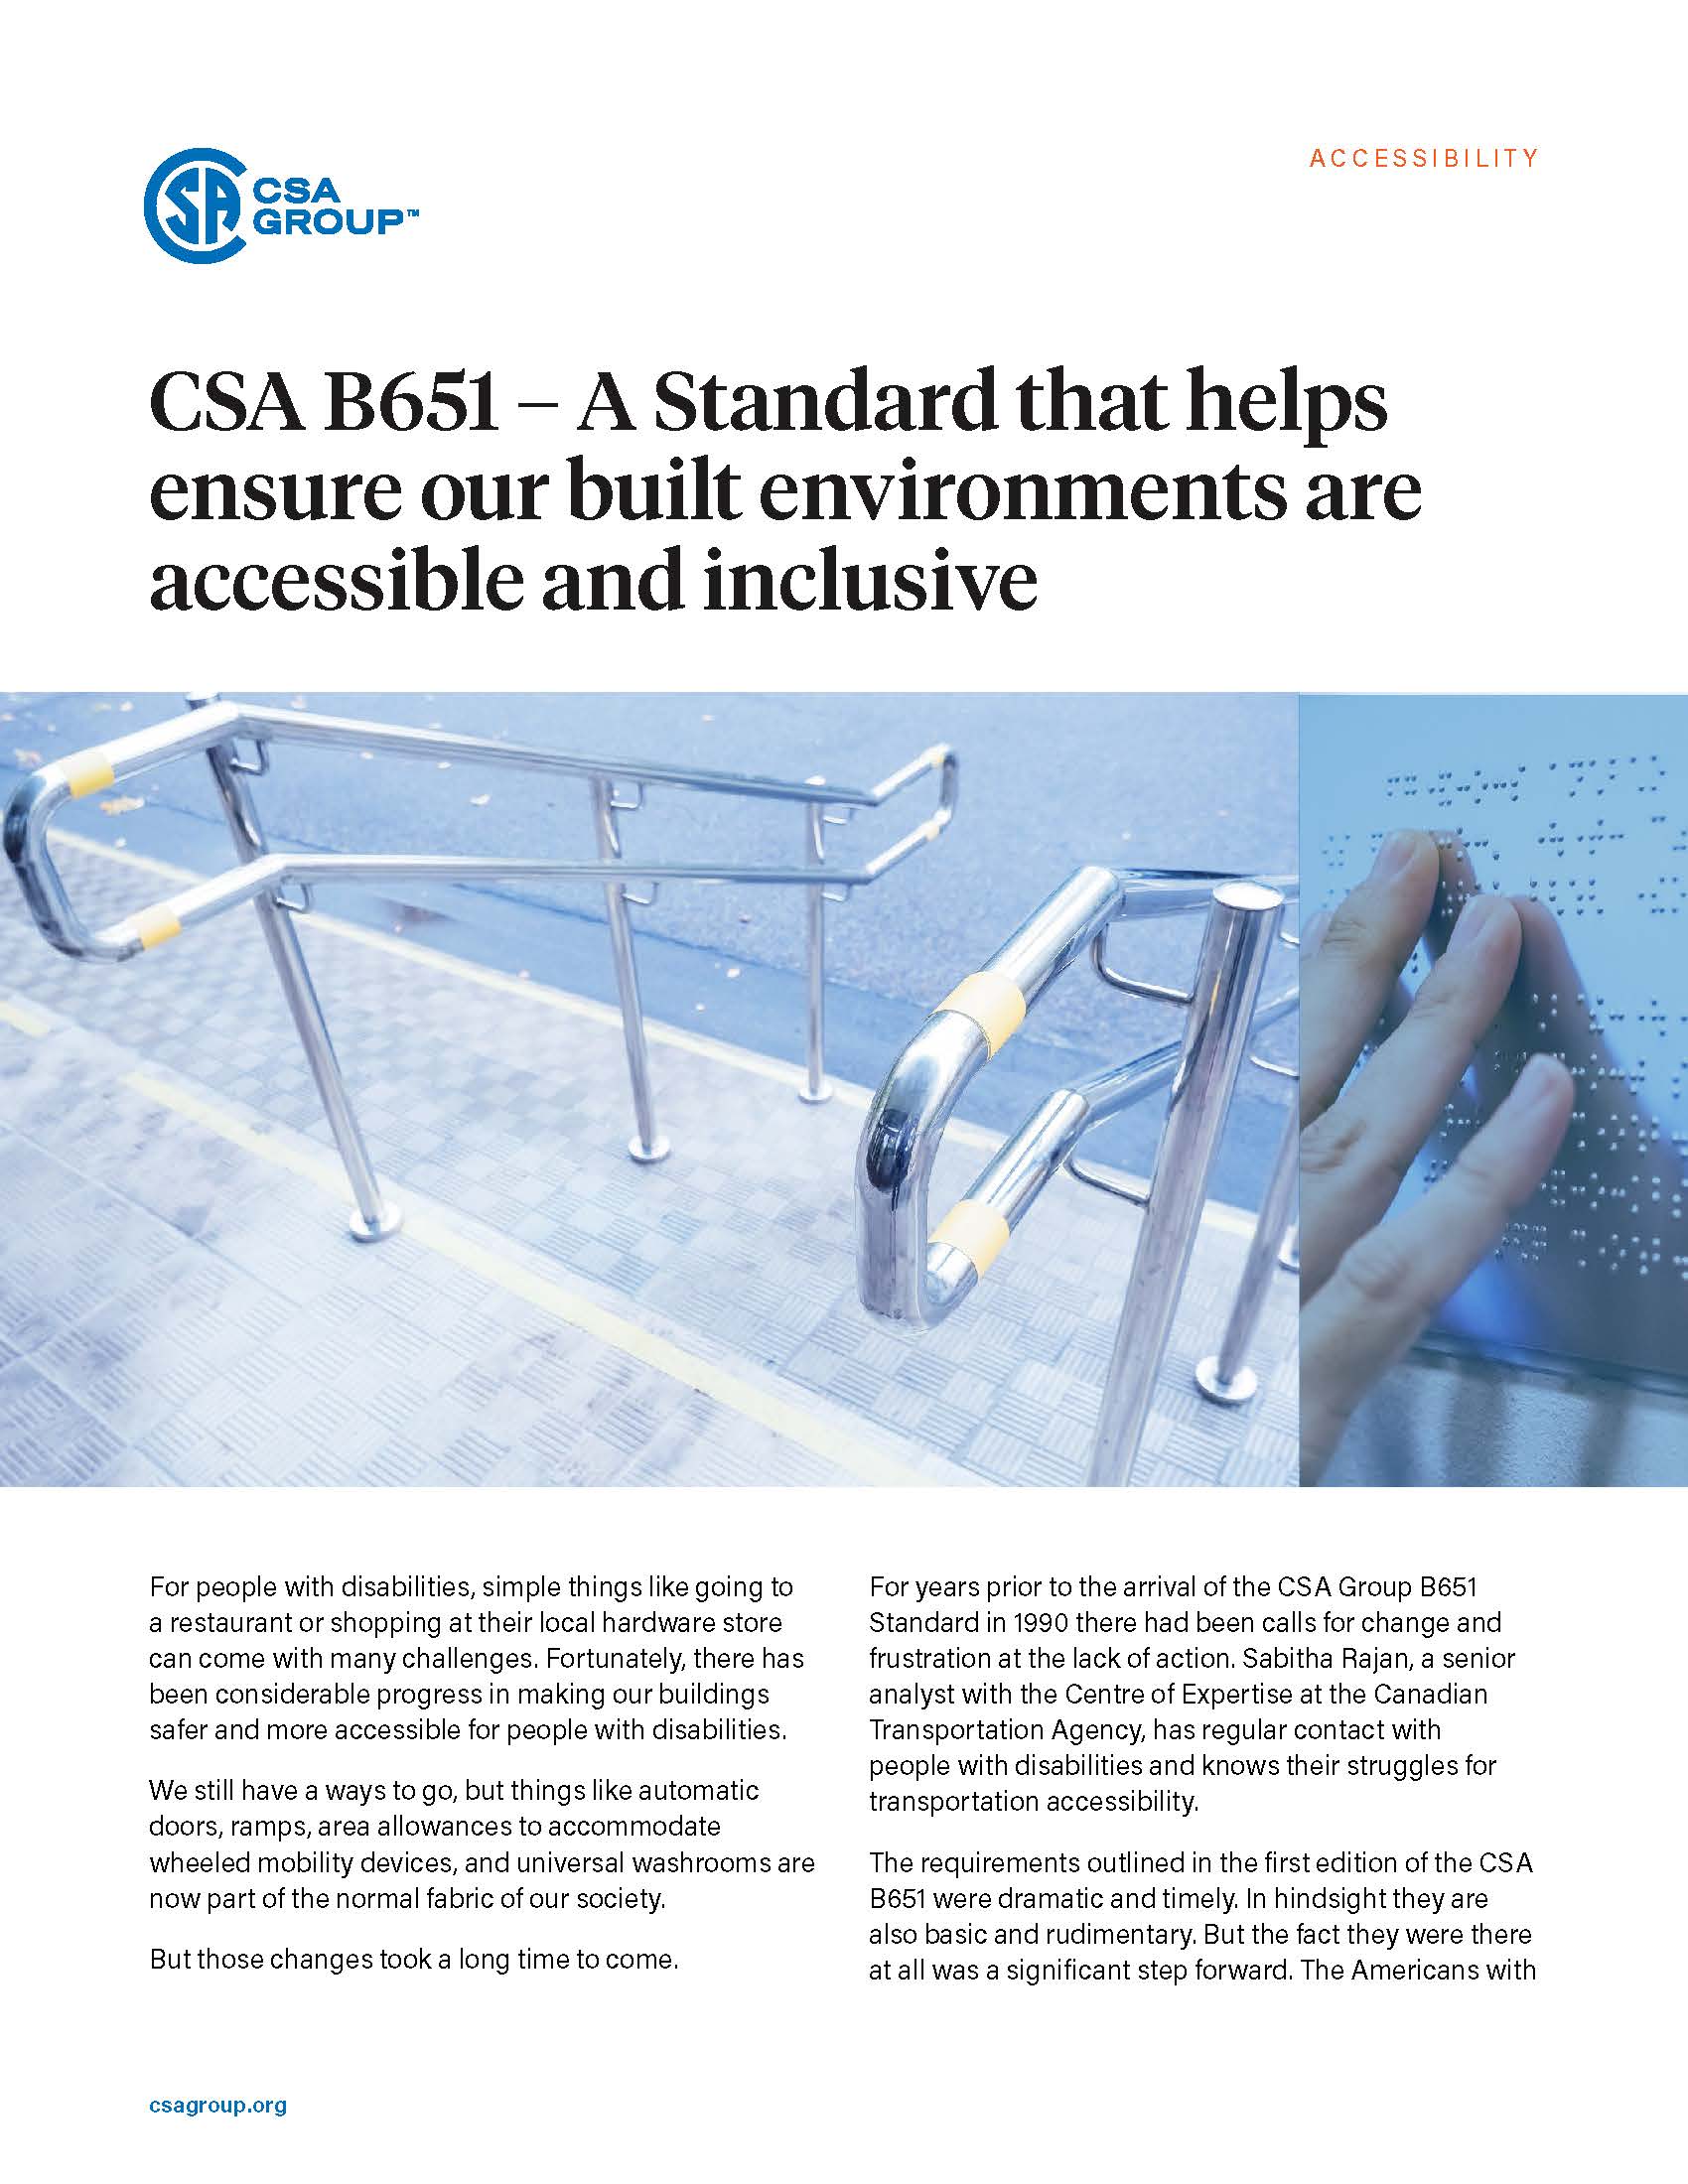 Featured Image. CSA B651 – A Standard that helps ensure our built environments are accessible and inclusive